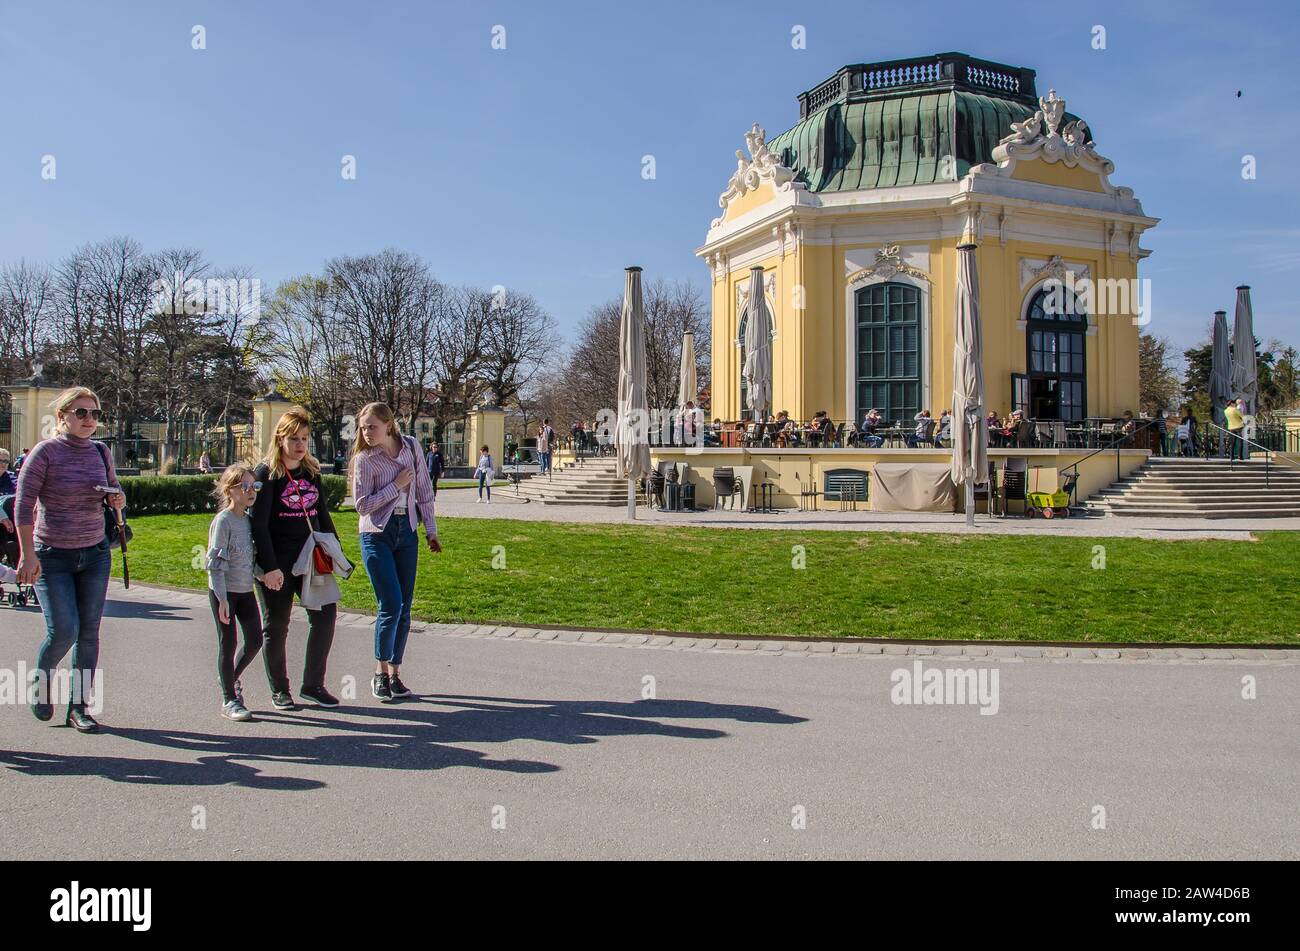 Tiergarten Schönbrunn or 'Vienna Zoo, founded as an imperial menagerie in 1752, is the oldest continuously operating zoo in the world. Stock Photo